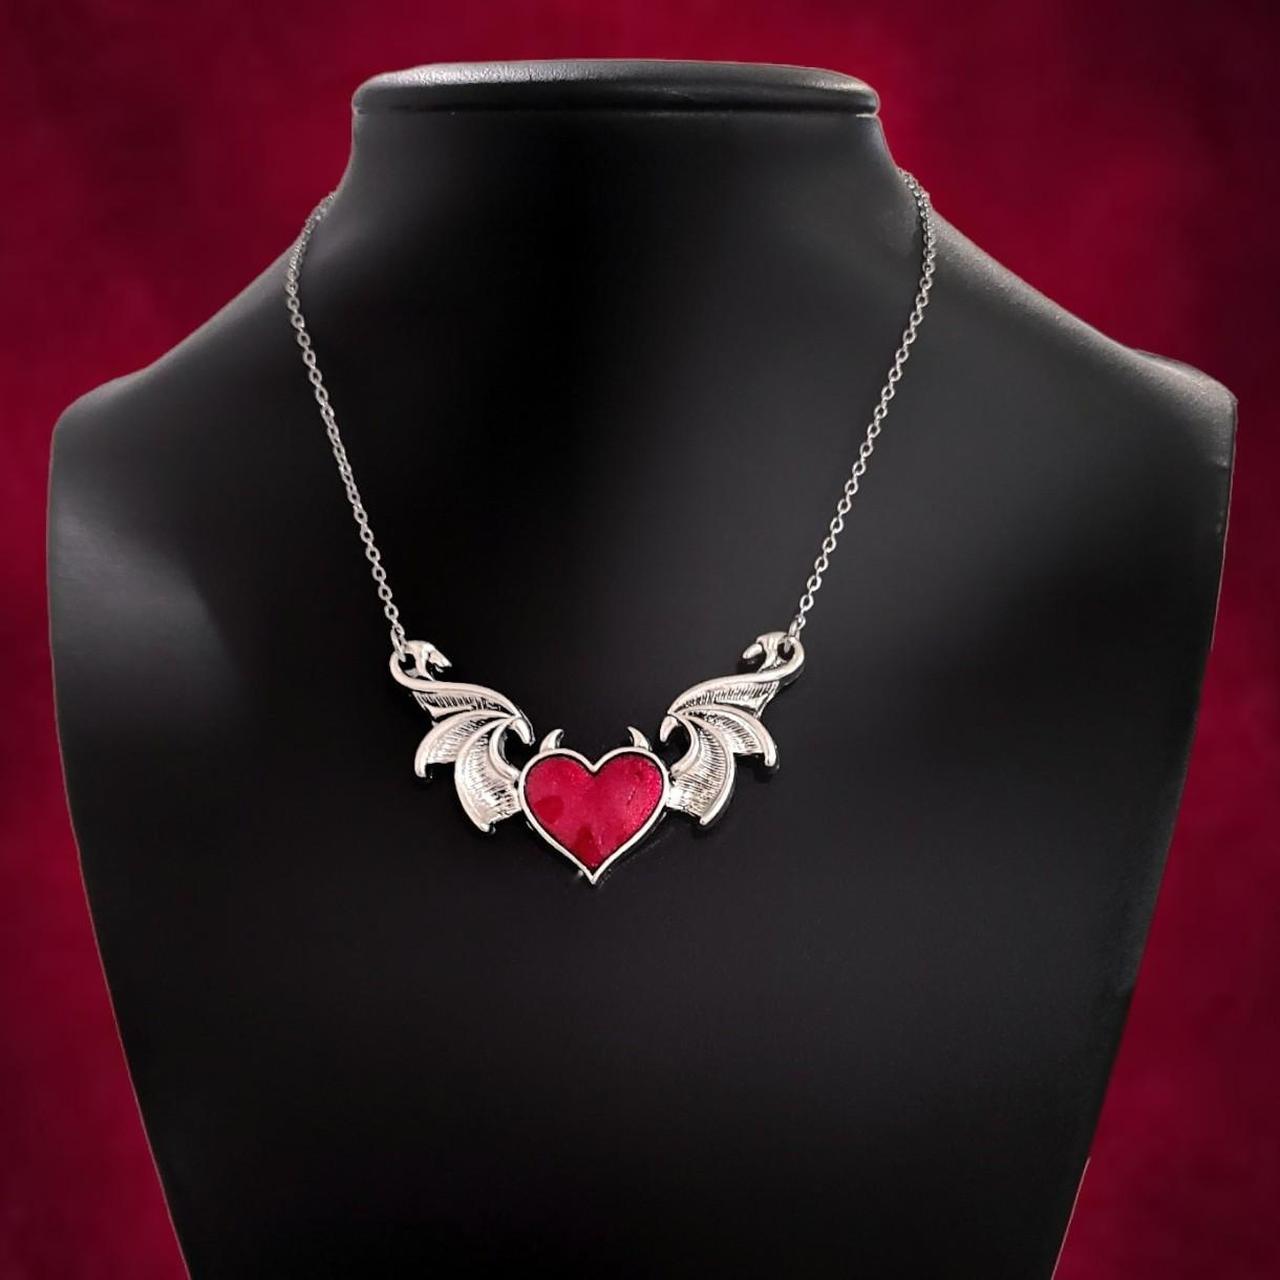 Product Image 2 - Red Batwing Heart Necklace
...
Red Enamel